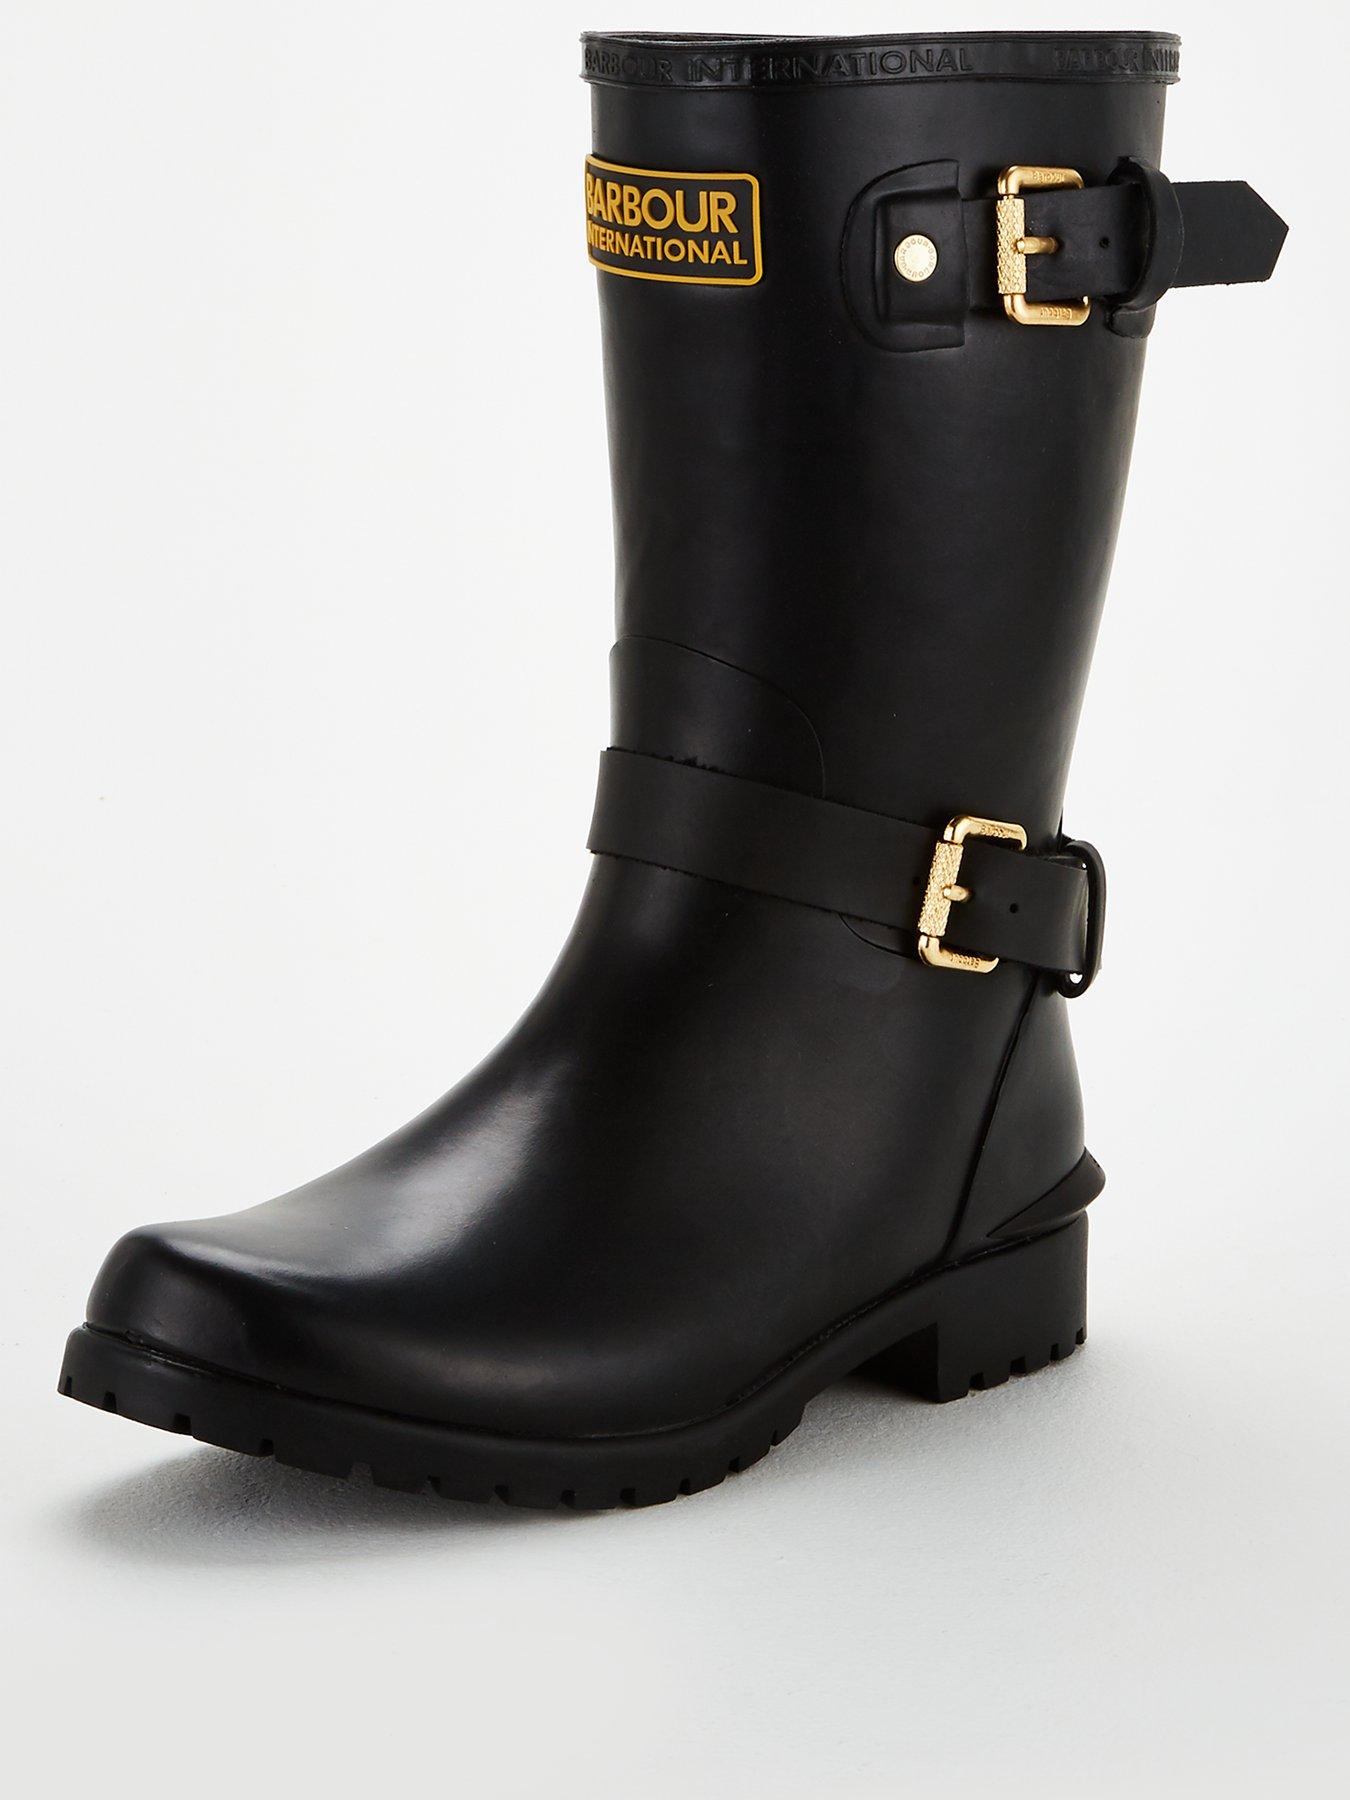 barbour monza welly